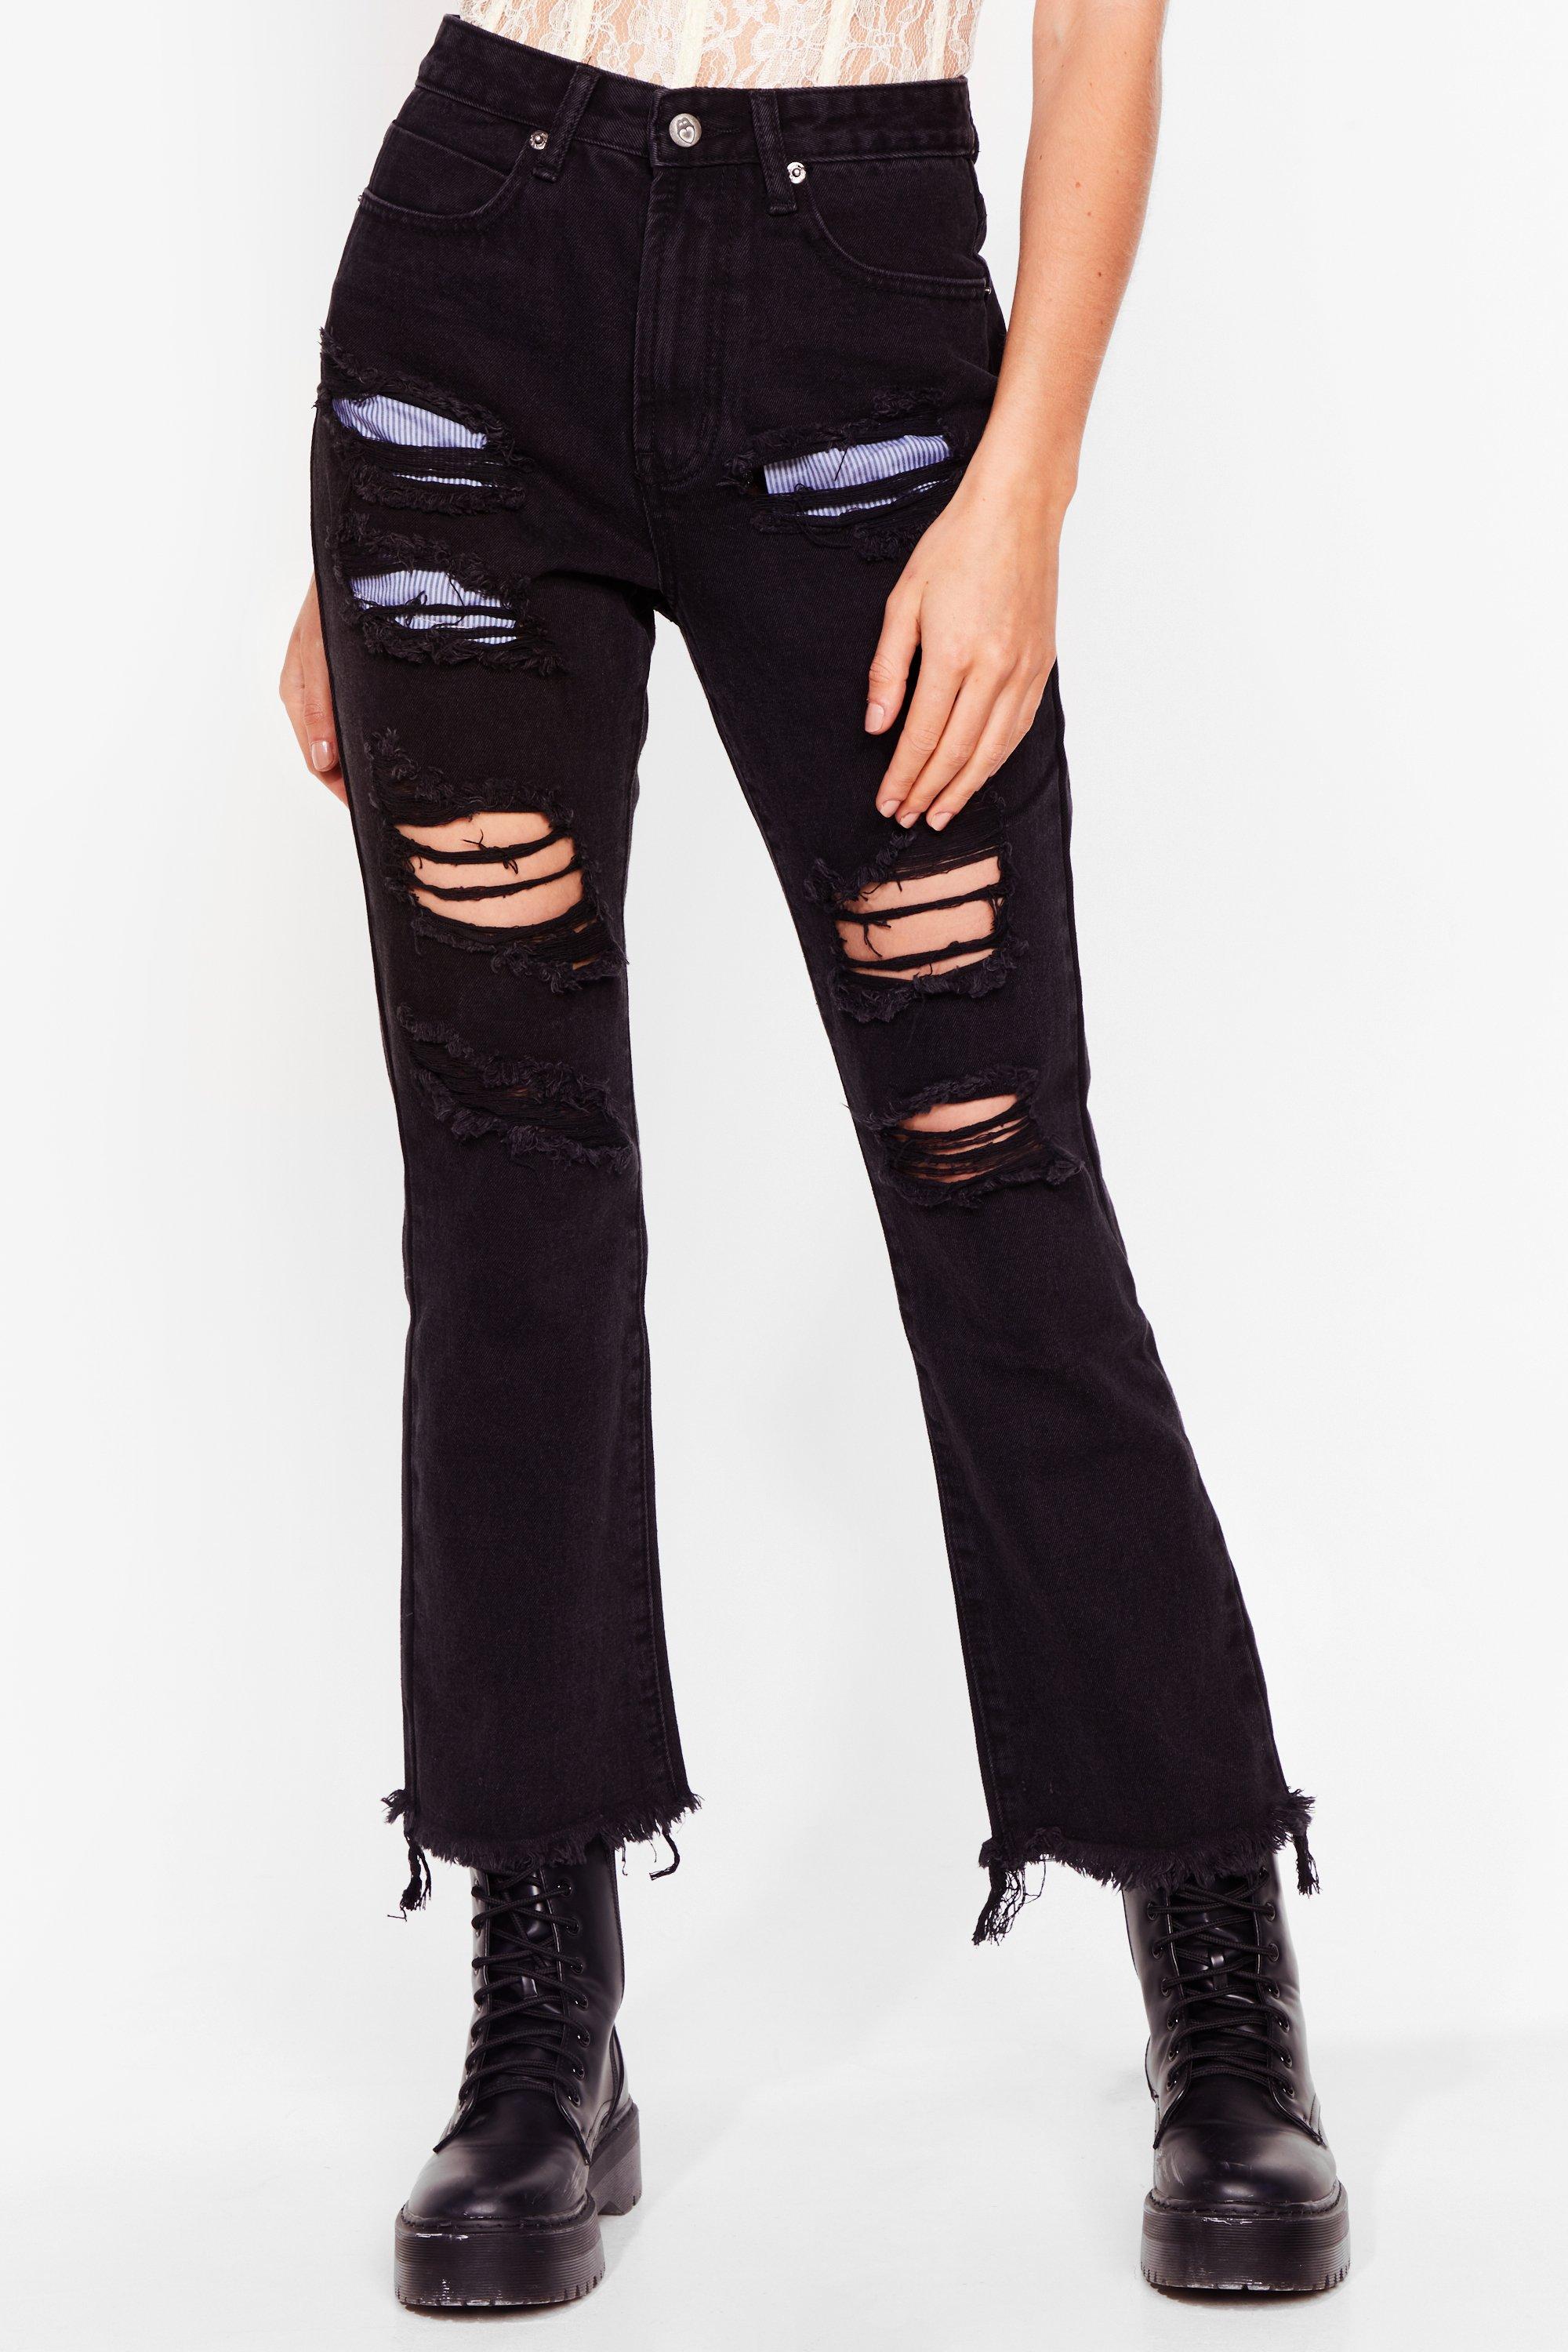 Play Back Ripped Straight Leg Jeans - Black Wash